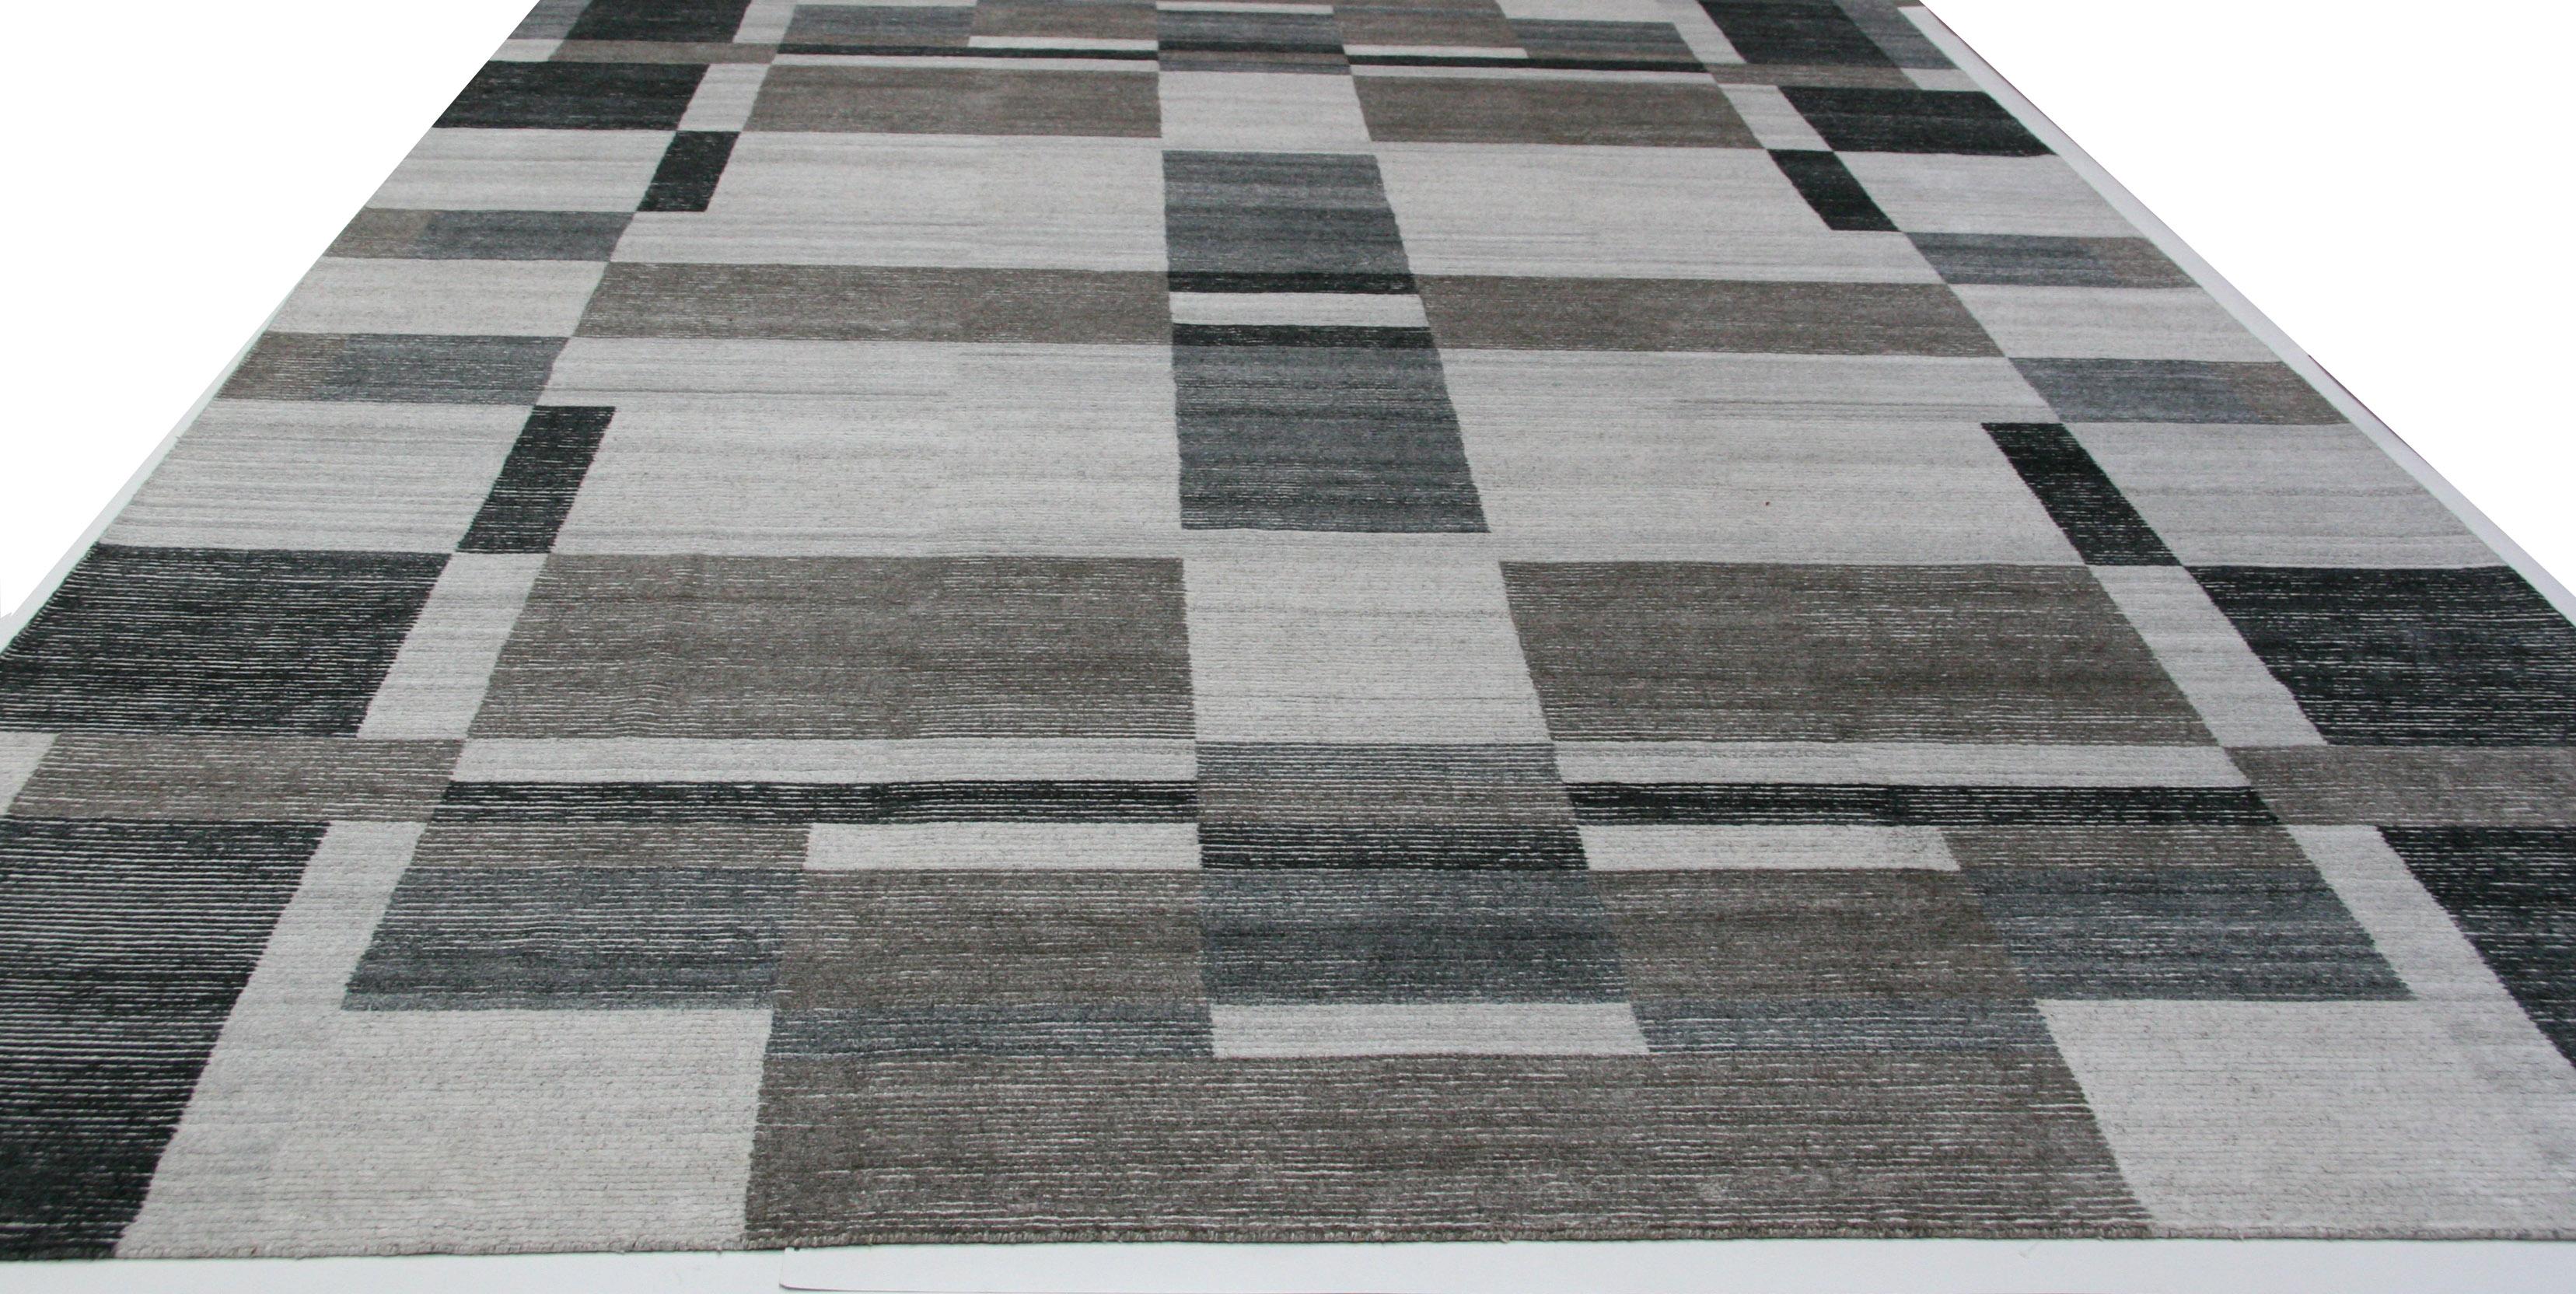 Cool and contemporary colors and geometric pattern create a piece well-suited for the modern home or office. Neutral beige/grey/taupe/off-white and black tones. A wool cotton blend makes for durability and comfort under foot.

Hand knotted in